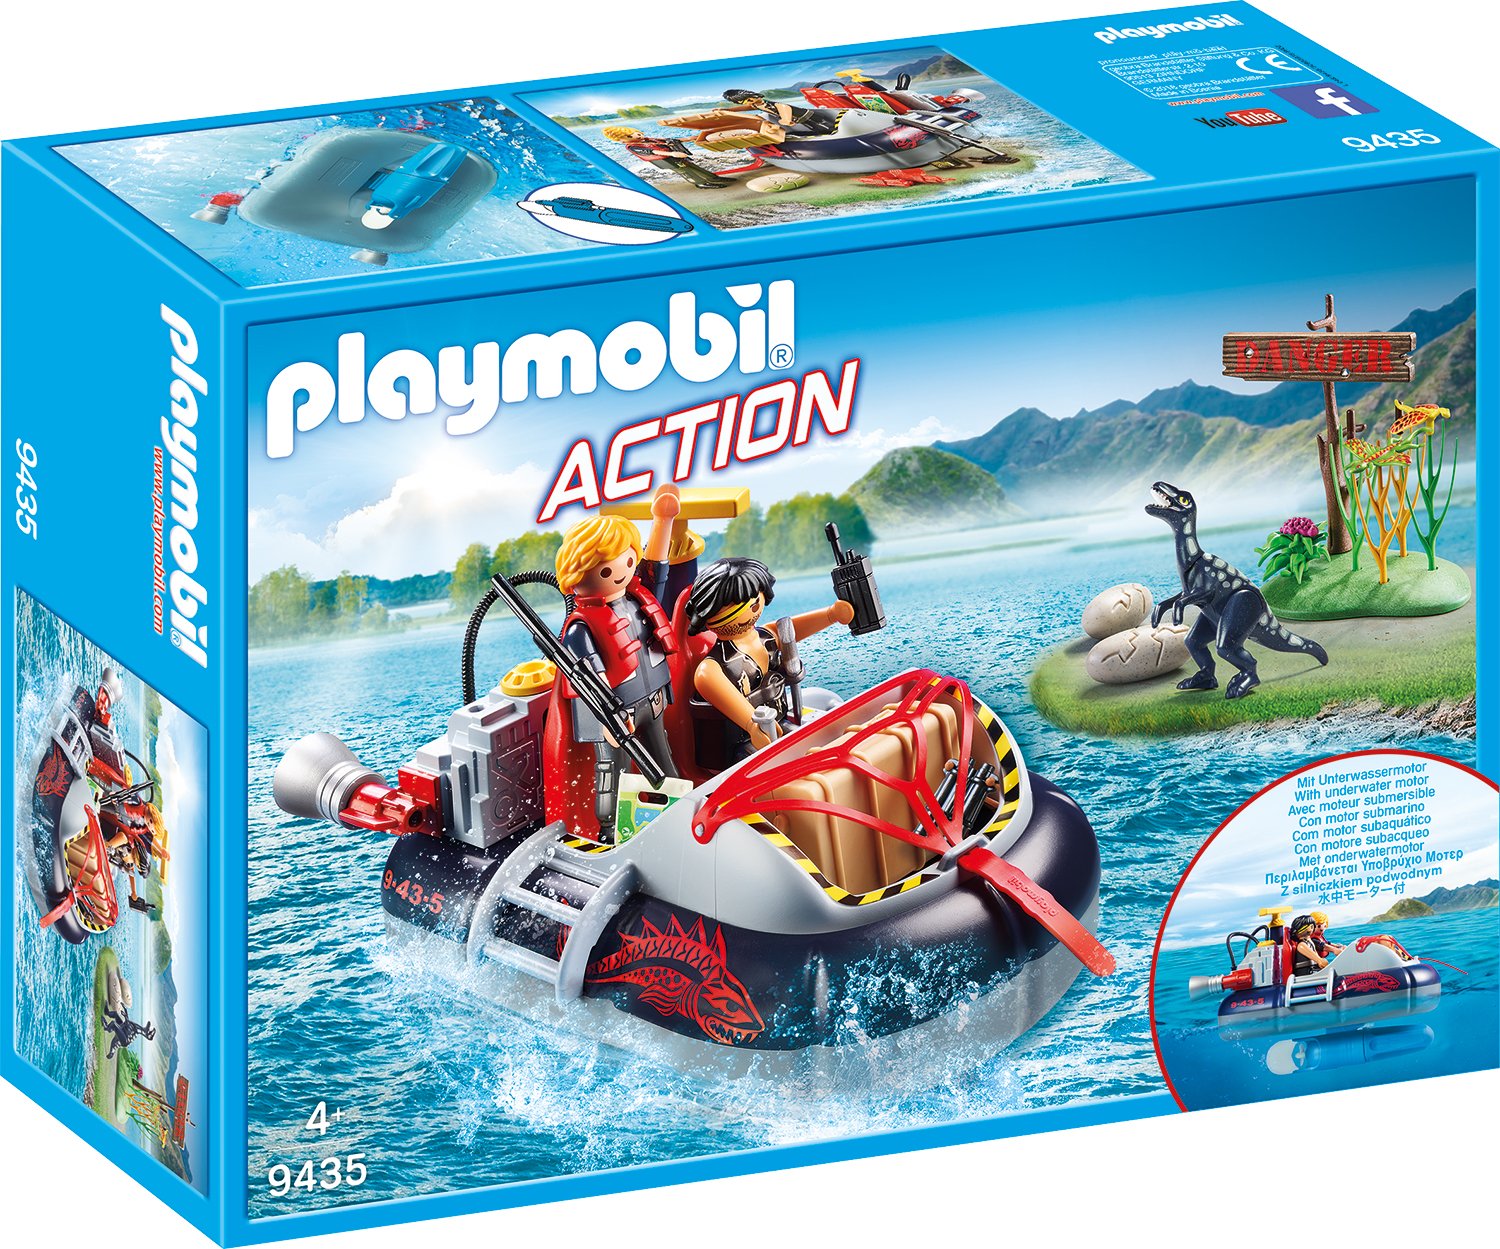 Playmobil Air Cushion Boat With Underwater Motor Game